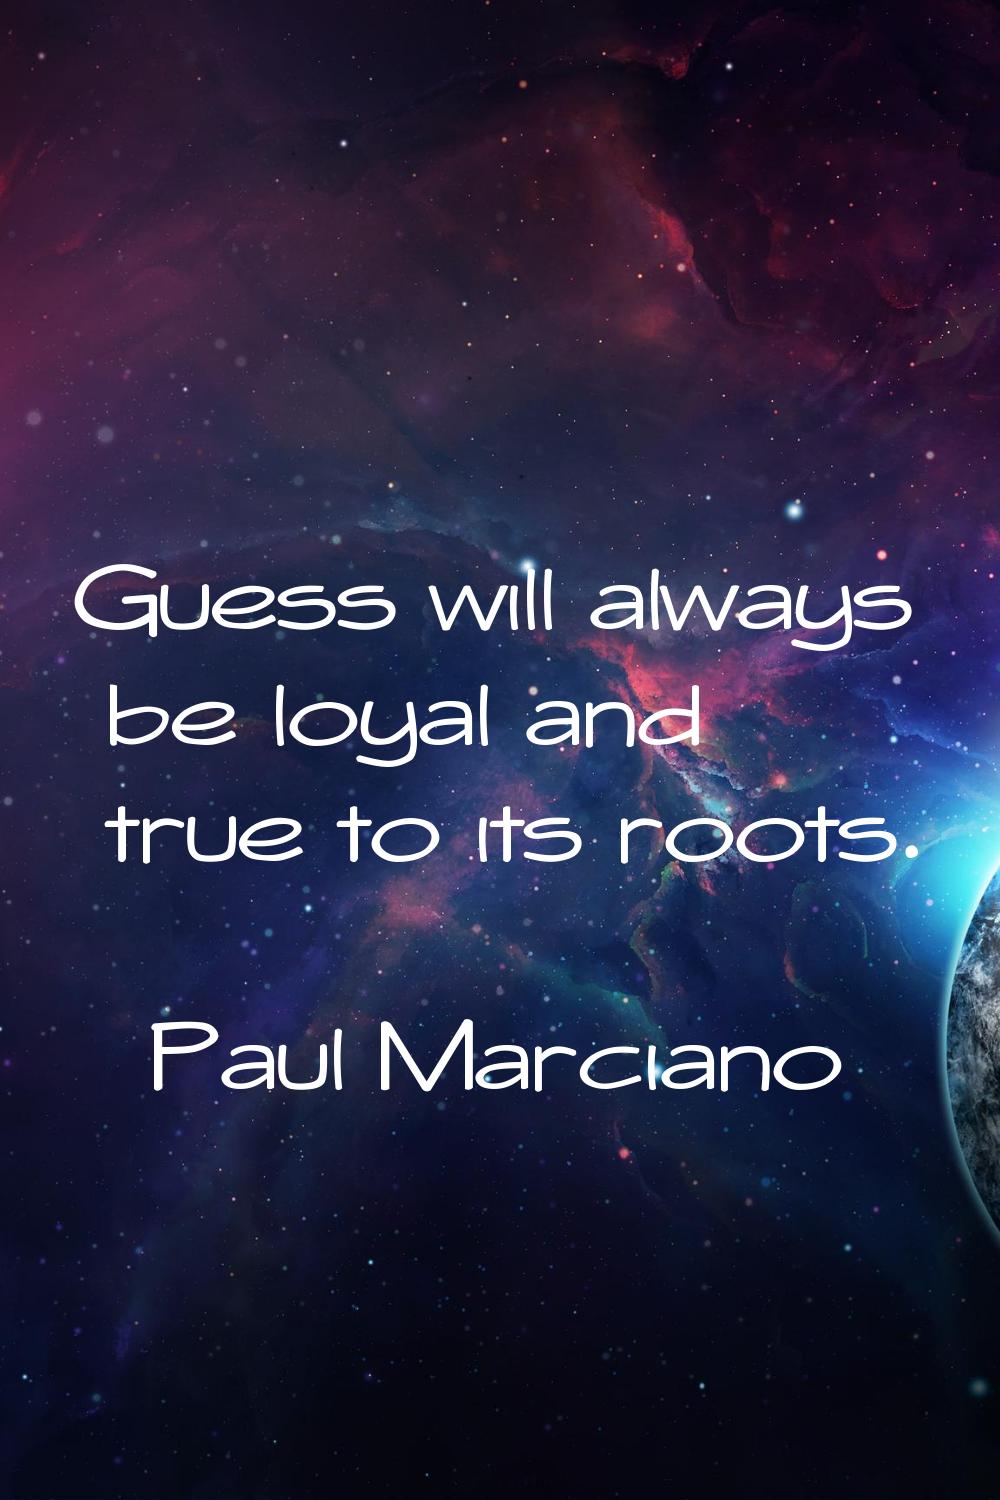 Guess will always be loyal and true to its roots.